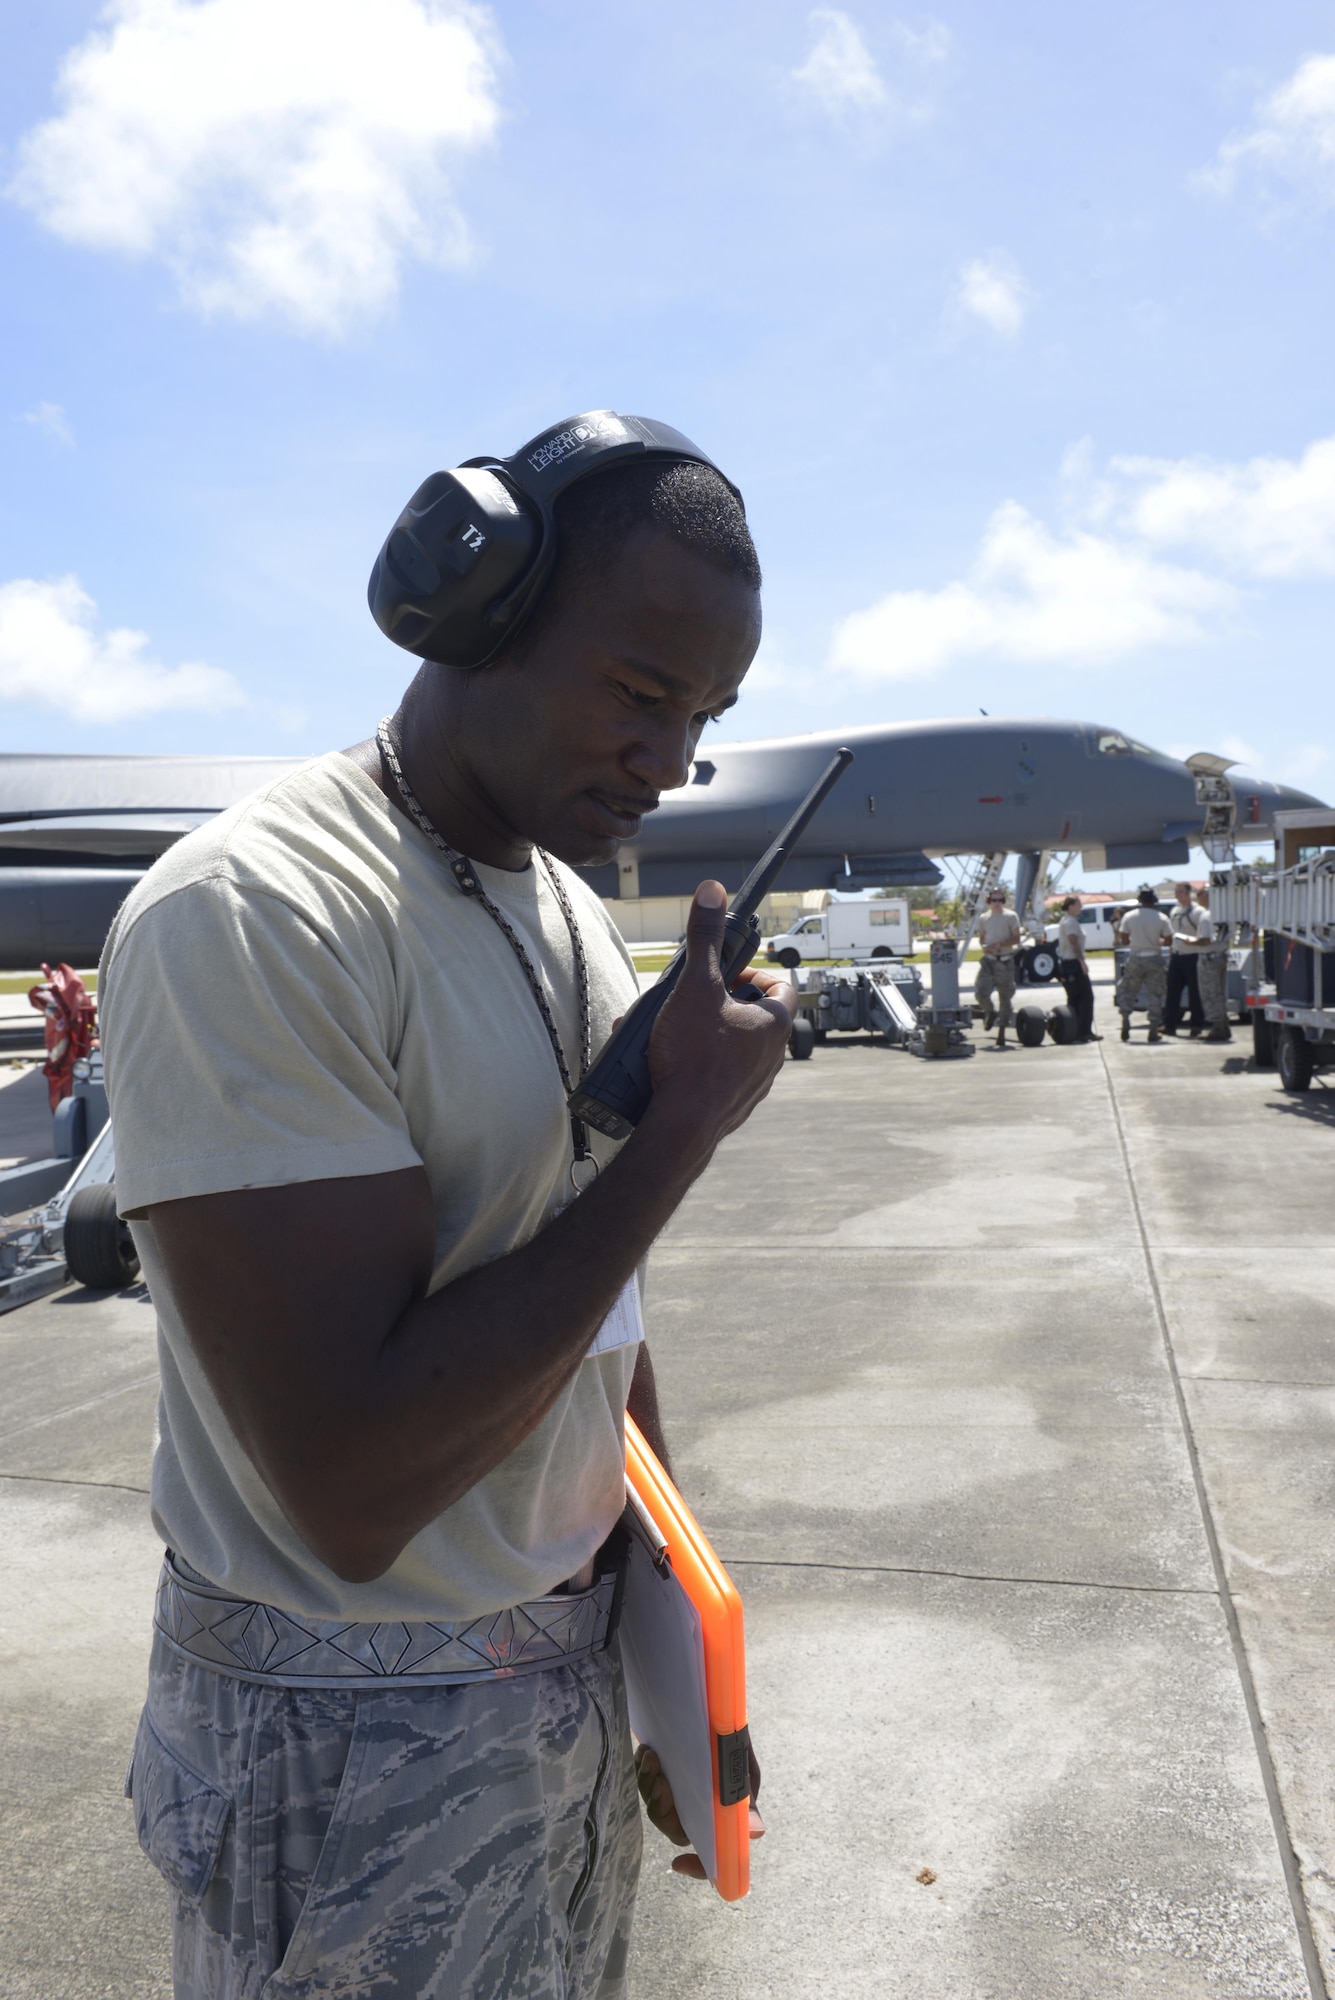 Tech. Sgt. Tyrone Garner, 36th Expeditionary Aircraft Maintenance Squadron weapons expediter, gives commands via radio to his weapons loading team May, 30, 2017, at Andersen Air Force Base, Guam. Garner and his team are deployed here from Dyess AFB, TX, in support of Pacific Command’s Continuous Bomber Presence mission. (U.S. Air Force Photo by Senior Airman Cierra Presentado/Released)